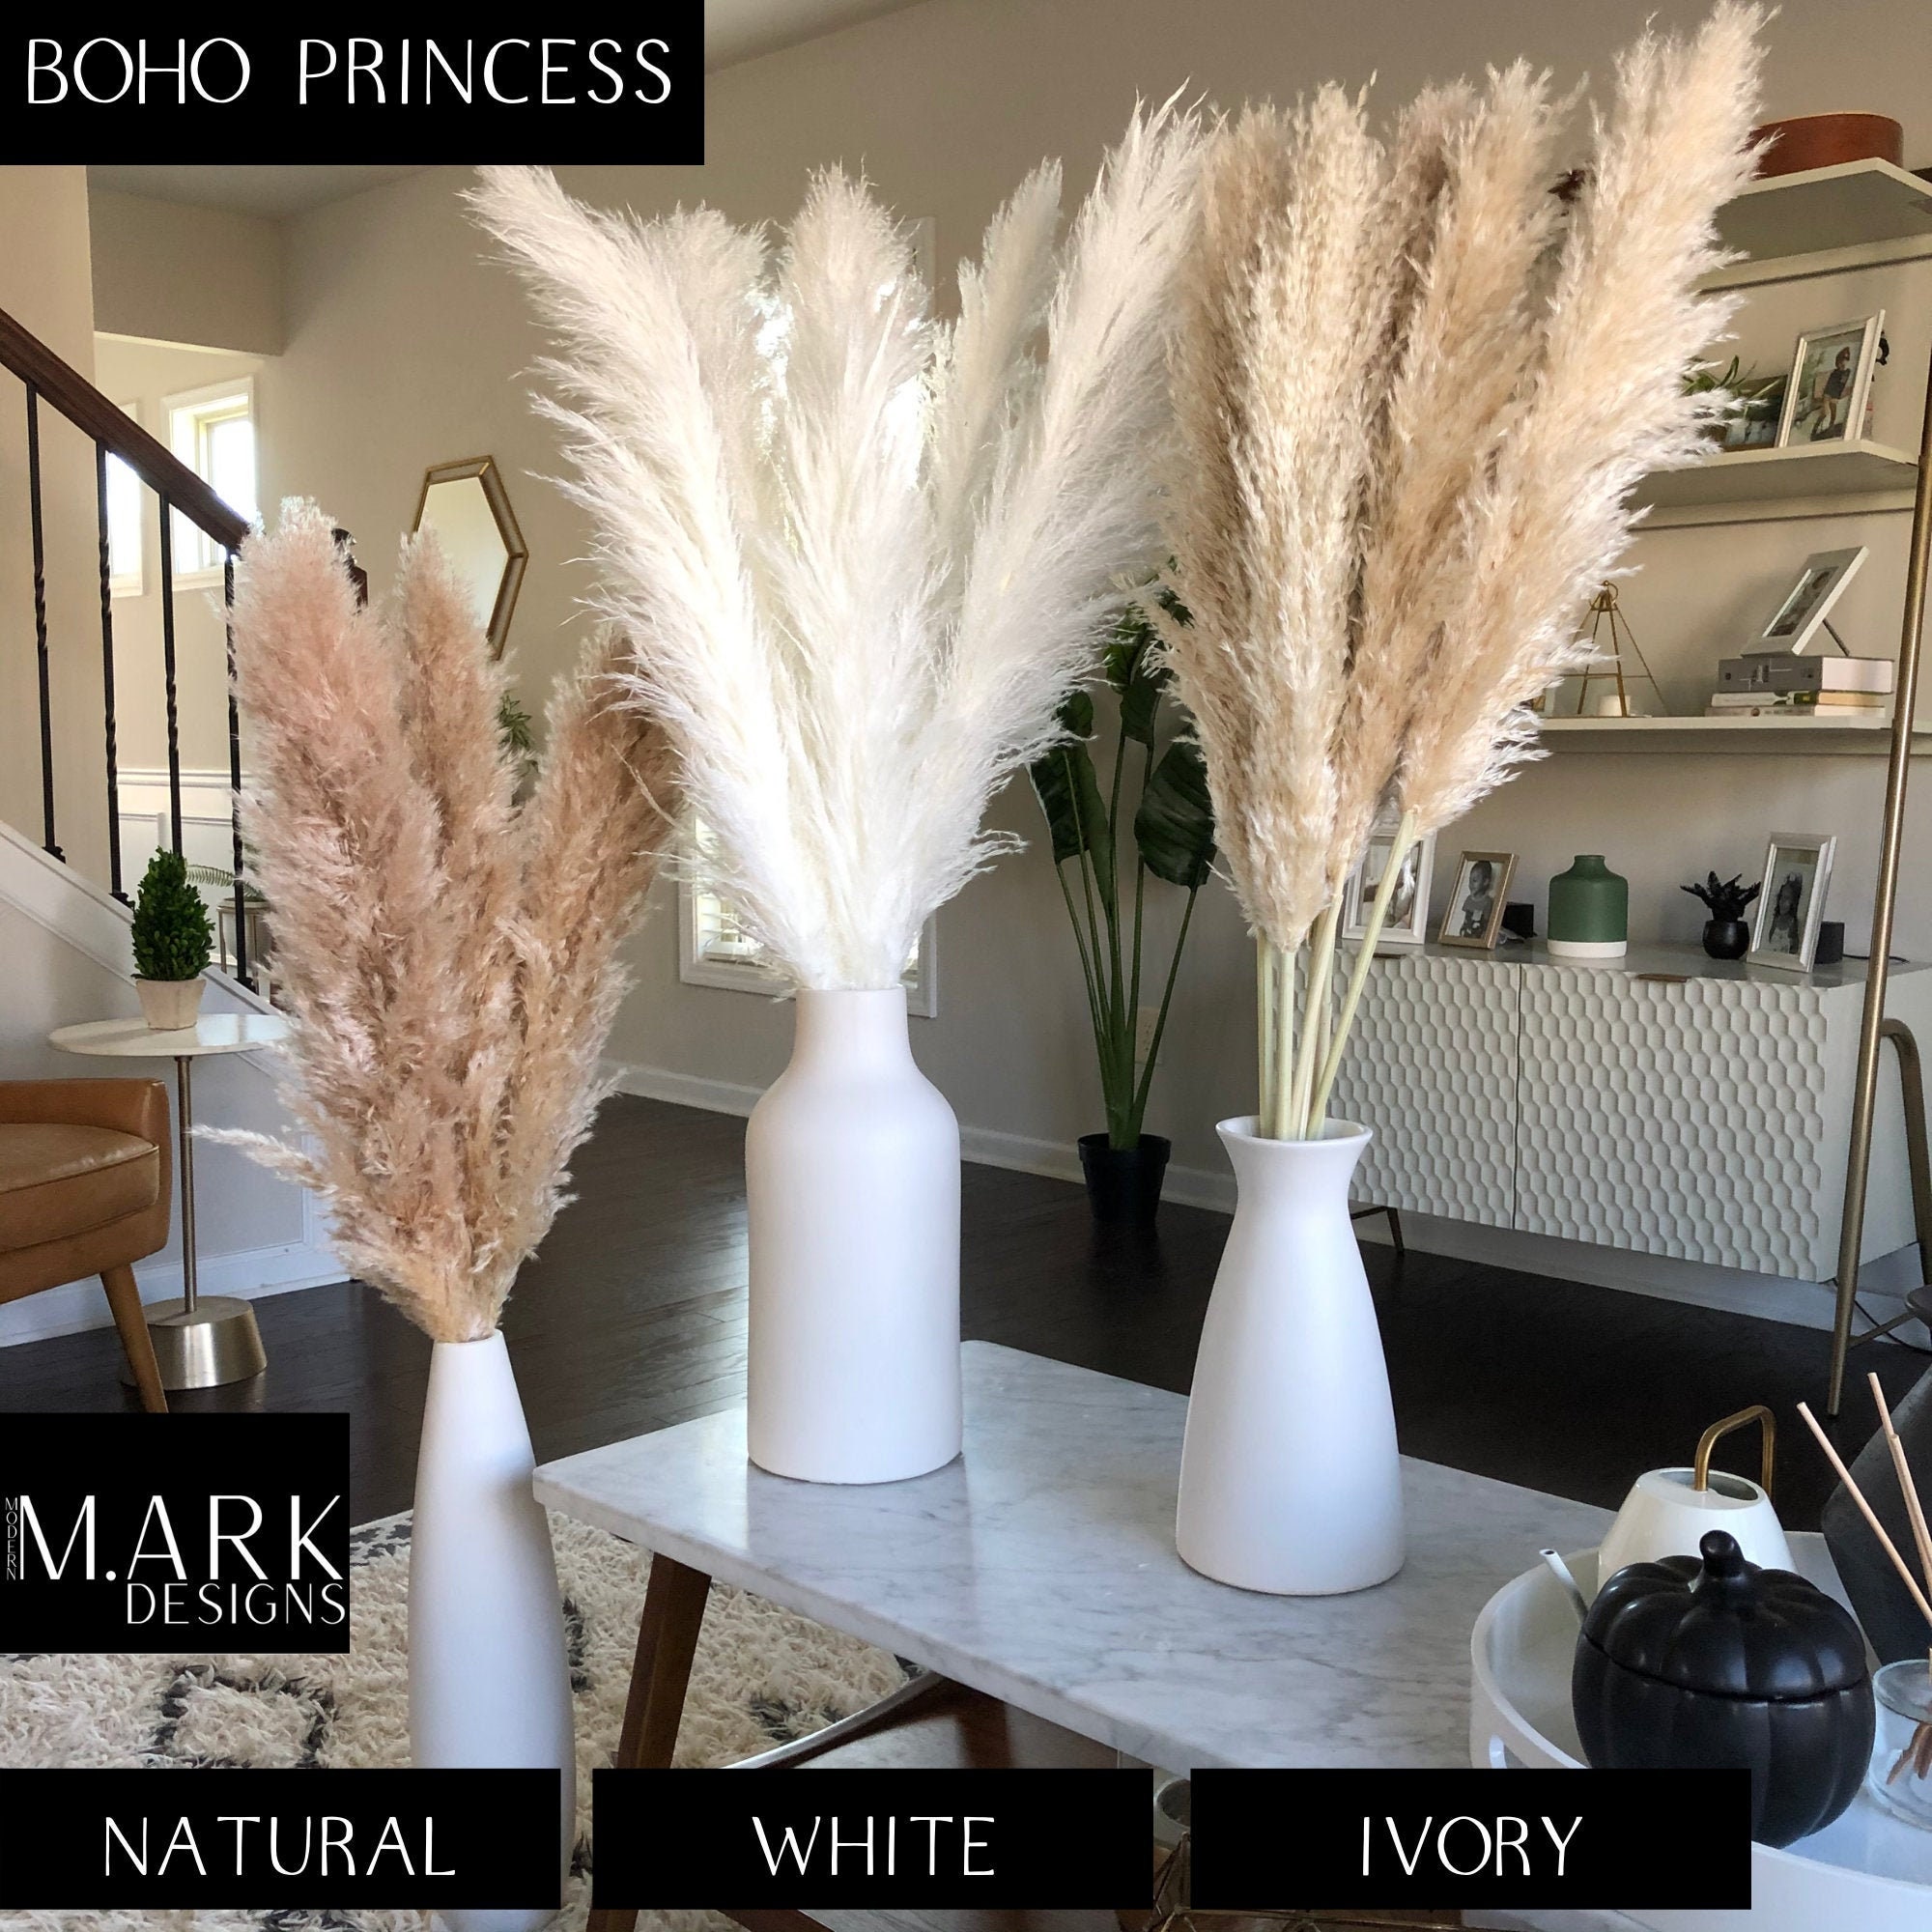 PAMPAS GRASS LARGE Fluffy Signature Faux Artificial Pampas Grass 42 Romantic Ivory Color Luxurious /& Stunning Wedding Flower Decoration